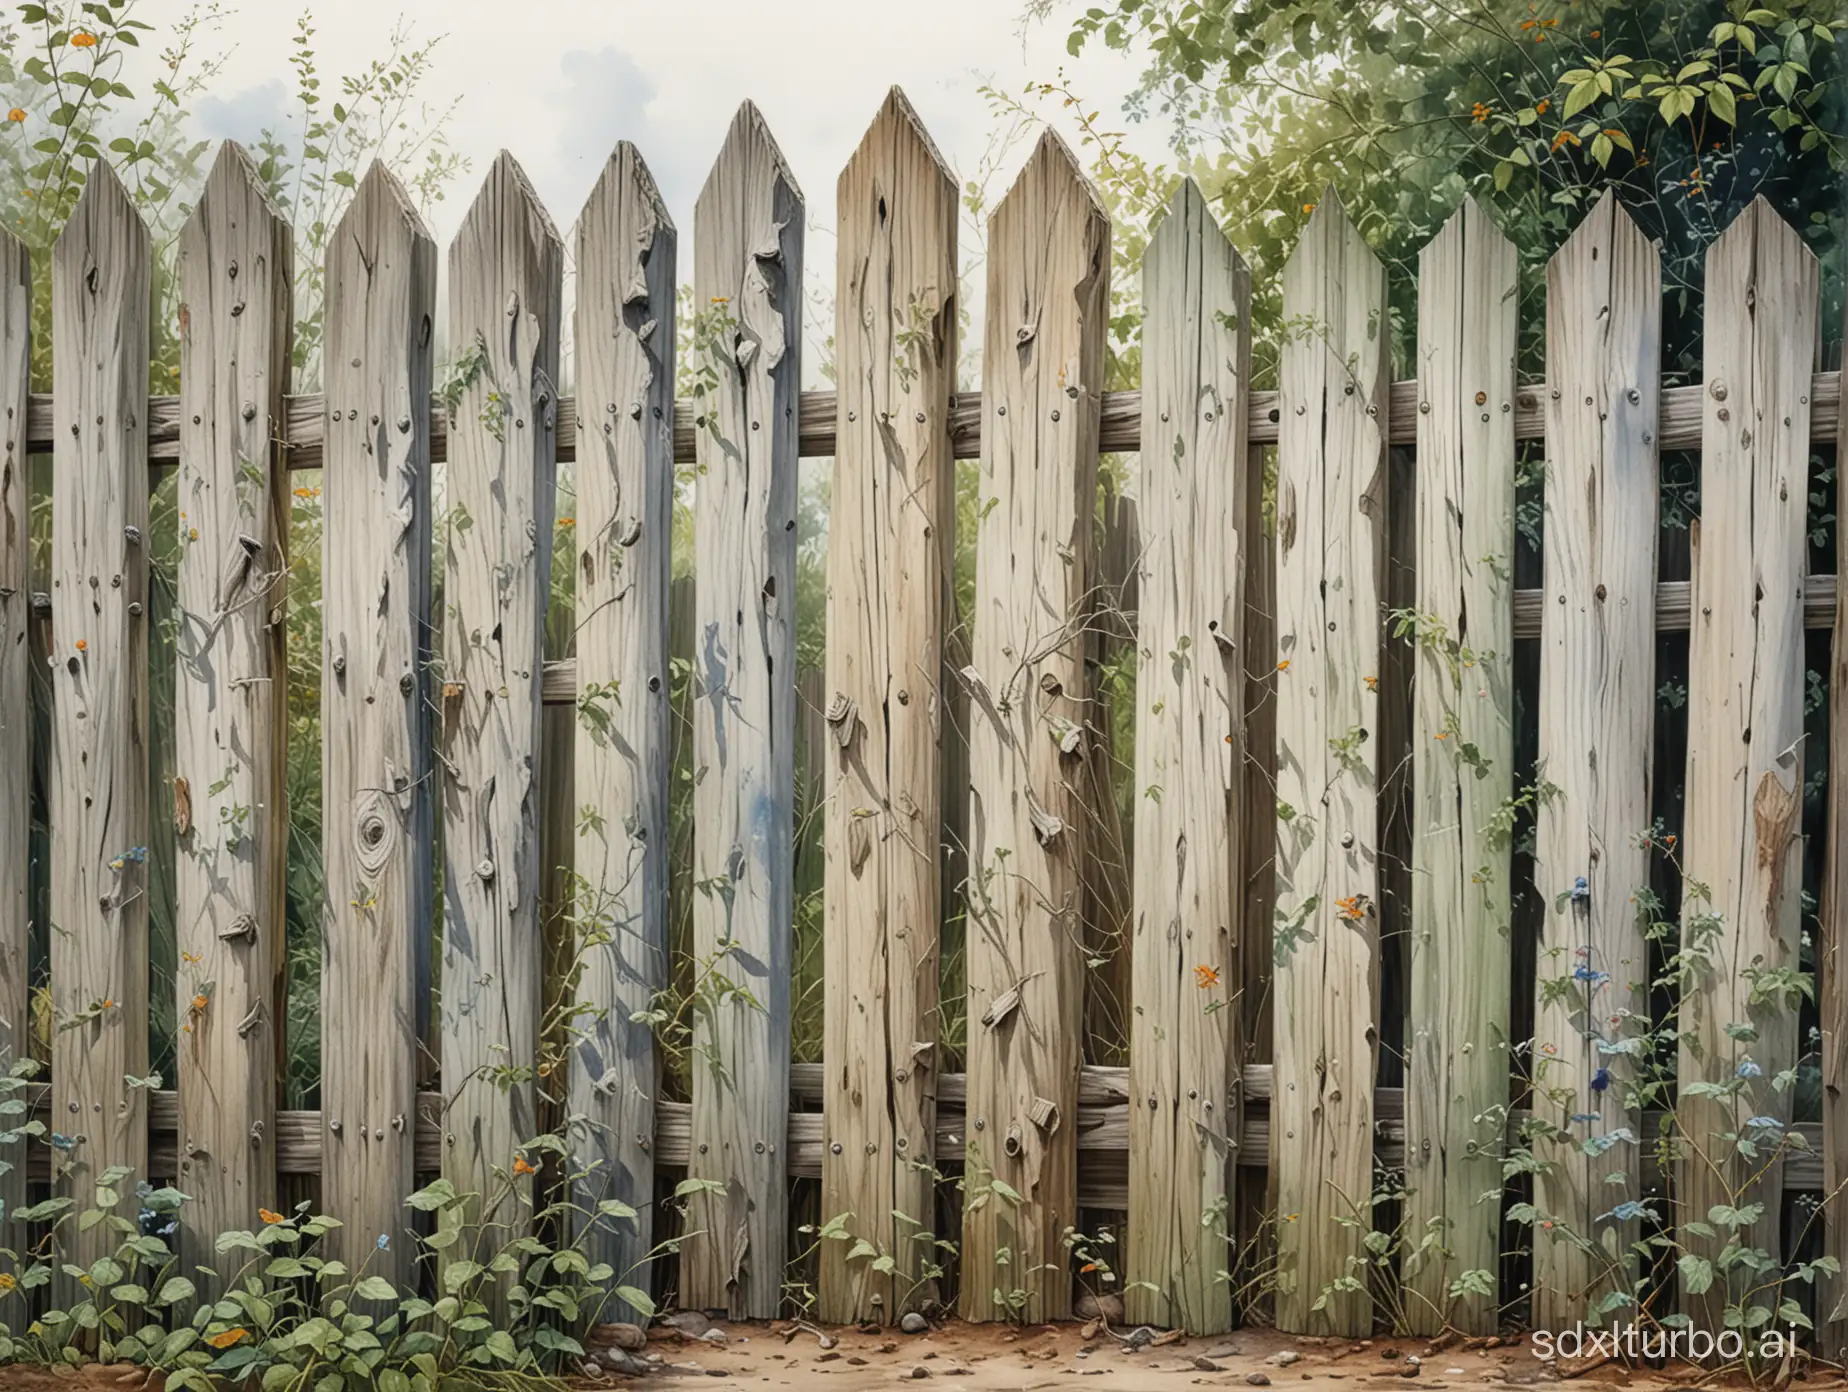 Detailed-Watercolor-Painting-of-a-Disheveled-Wooden-Fence